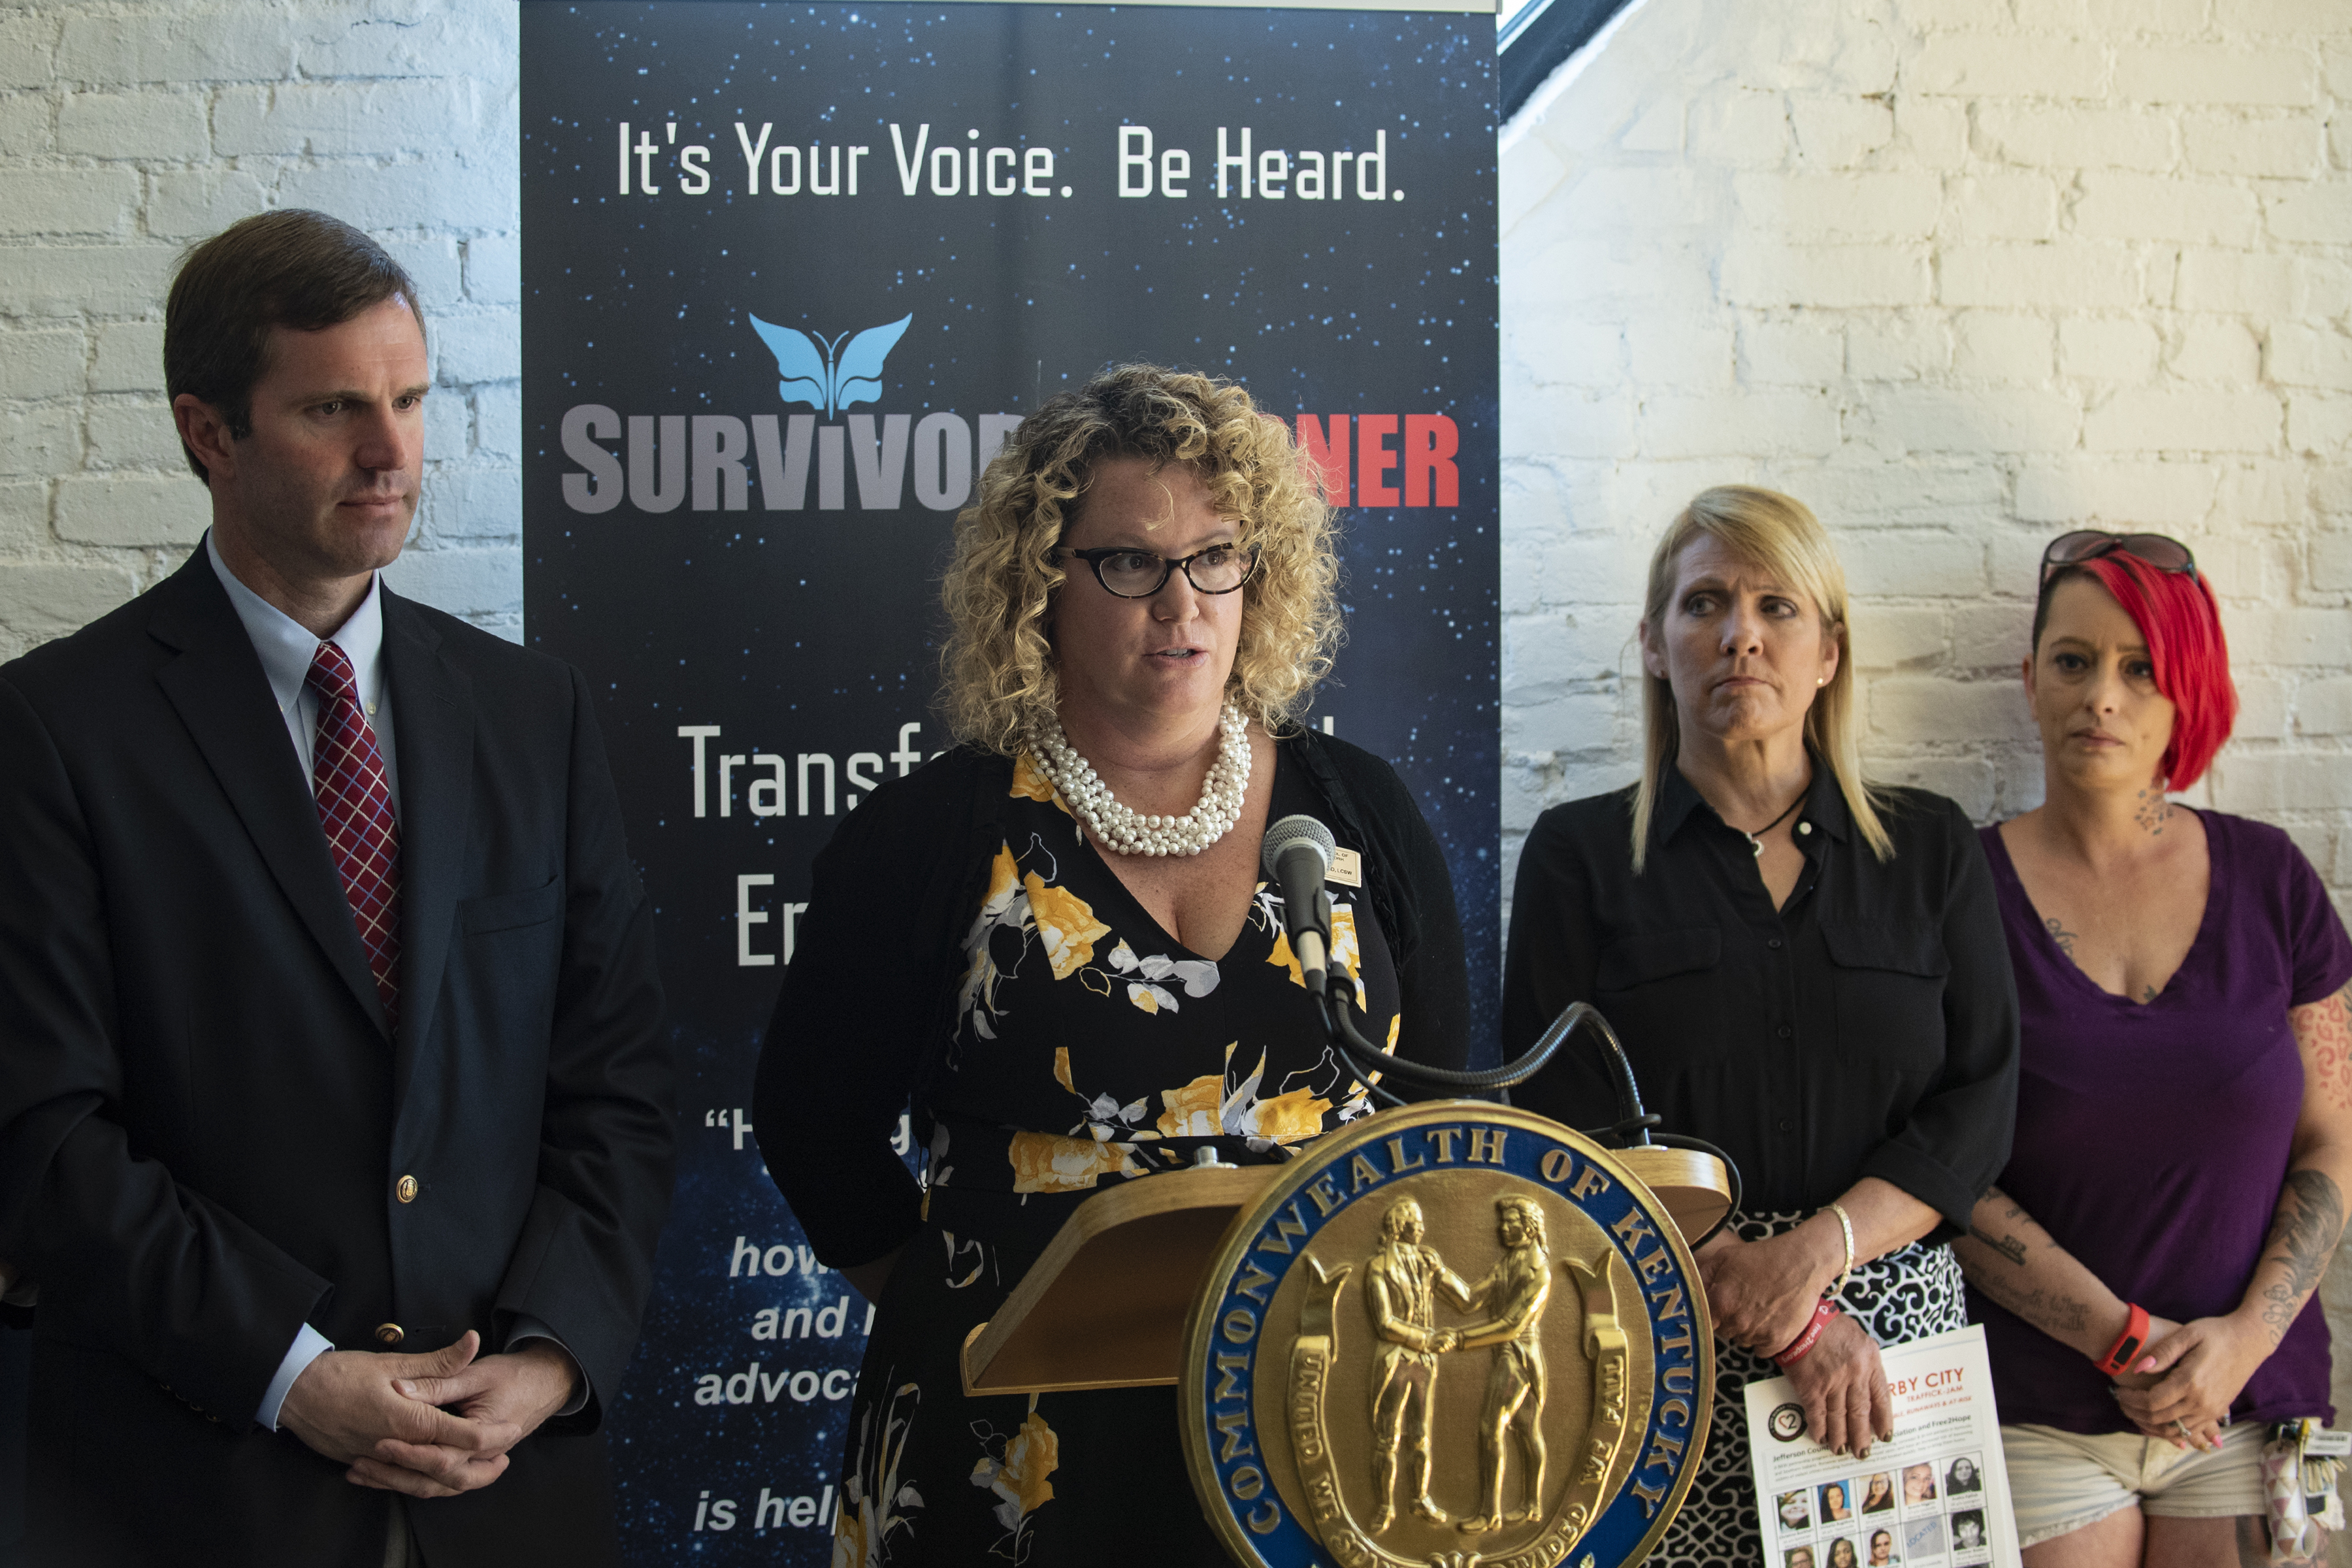 Kent School of Social Work associate professor Jennifer Middleton speaks at a human trafficking awareness announcement with Kentucky Attorney General Andy Beshear, Free2Hope founder Amy Leenerts and Women of the Well founder Summer Dickerson.